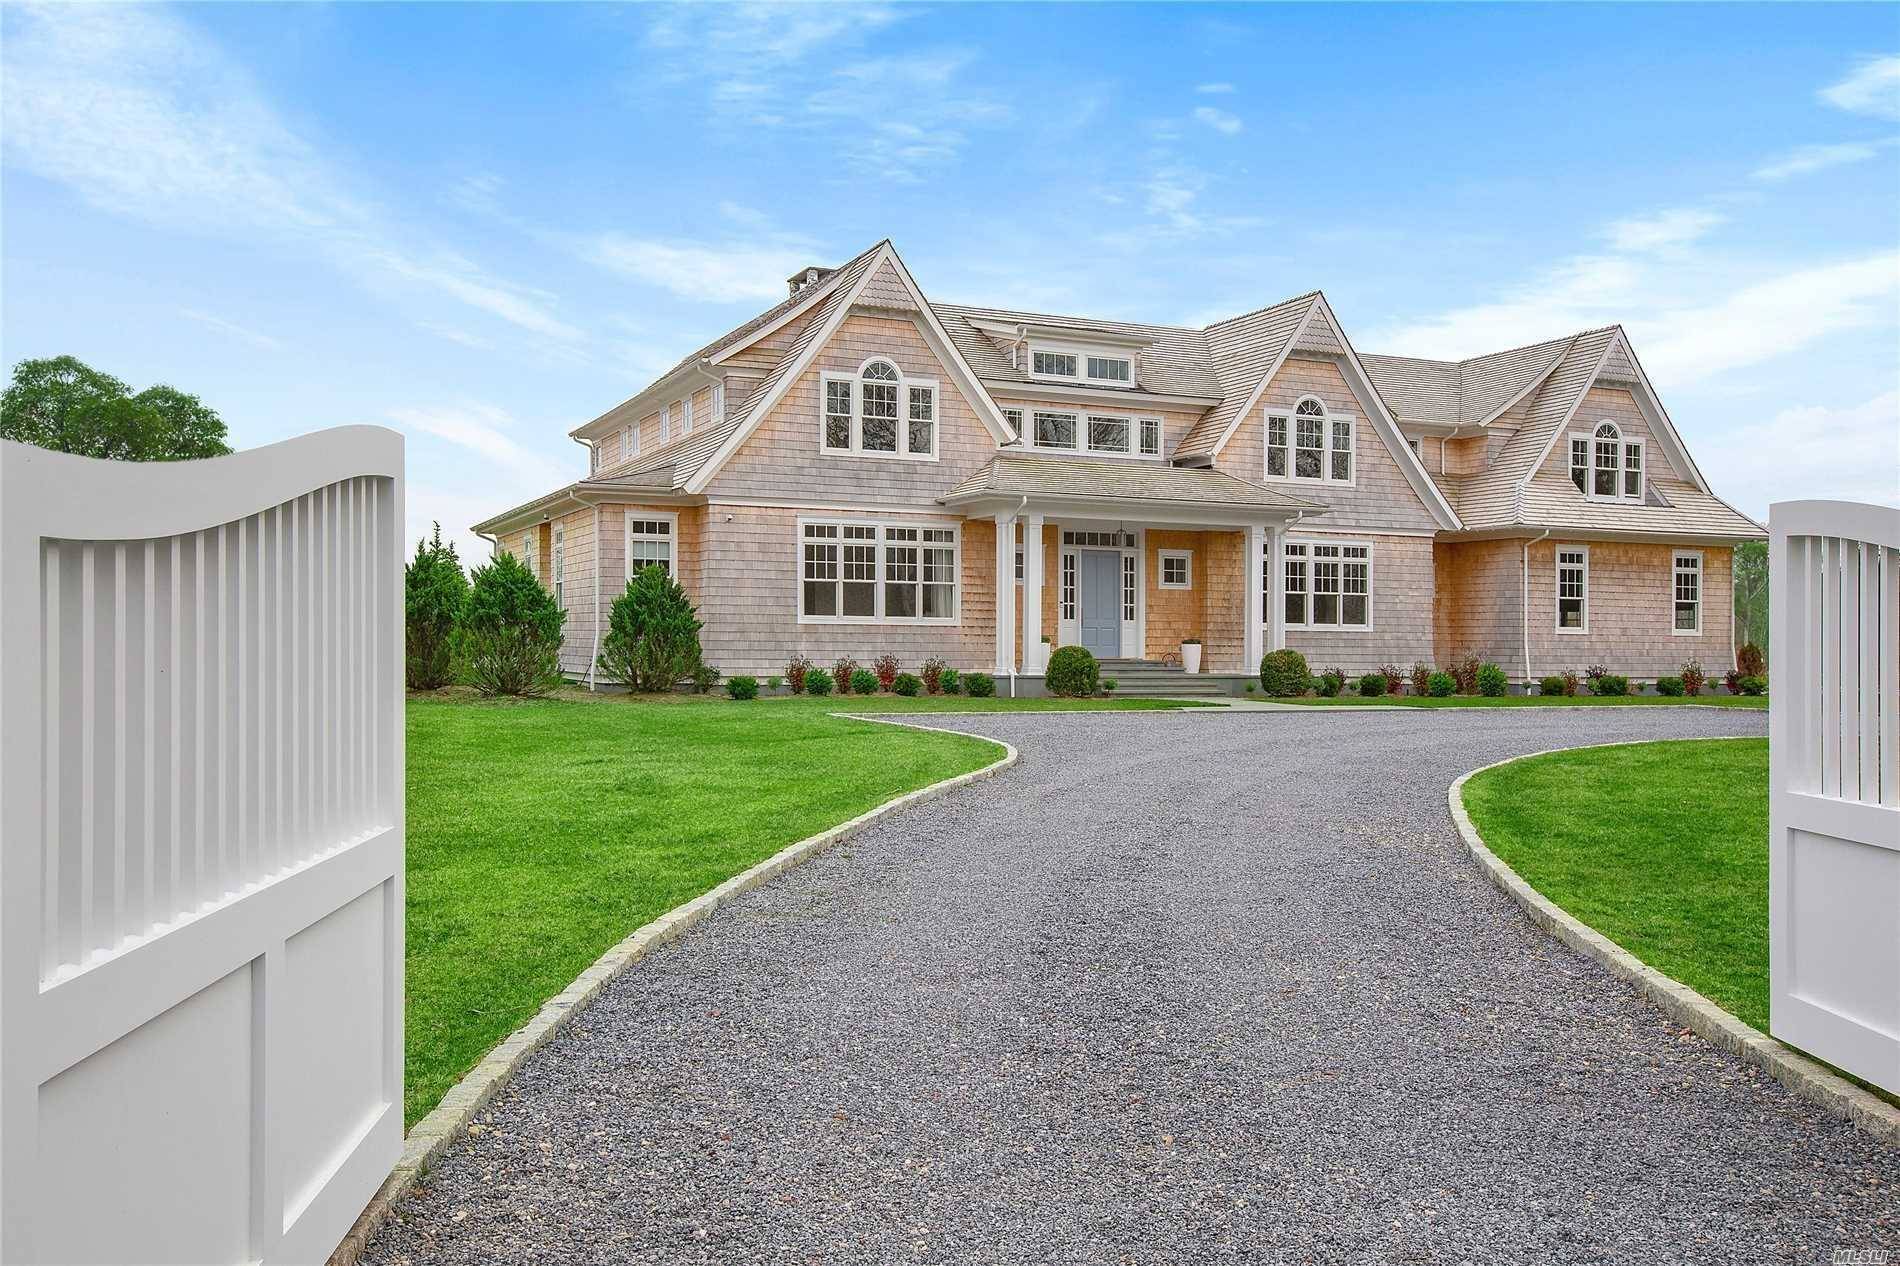 Through The Private, Gated Entry Find This Extraordinary New Construction In Beautiful Quogue.